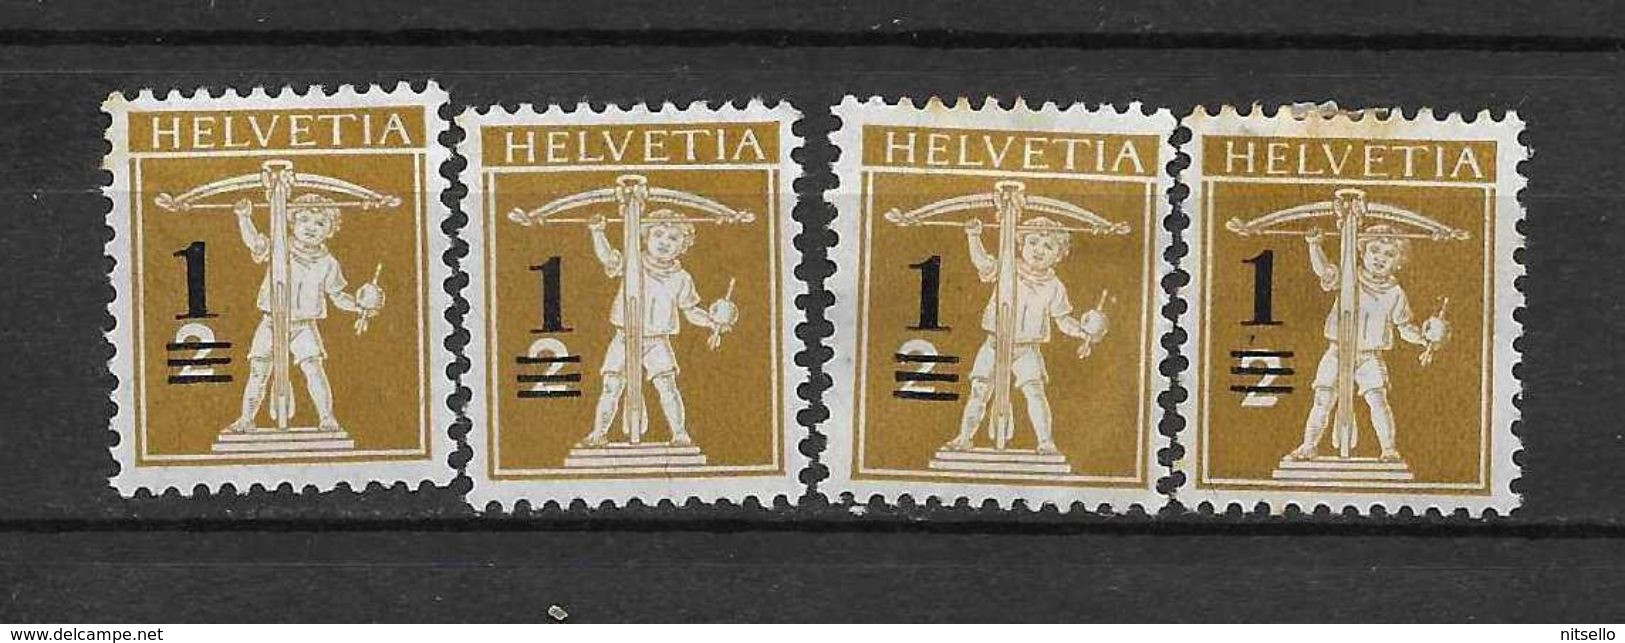 LOTE 1578  ///  SUIZA  1914     YVERT Nº: 145 *MH     ¡¡¡¡¡ LIQUIDATION !!!!!!! - Unused Stamps